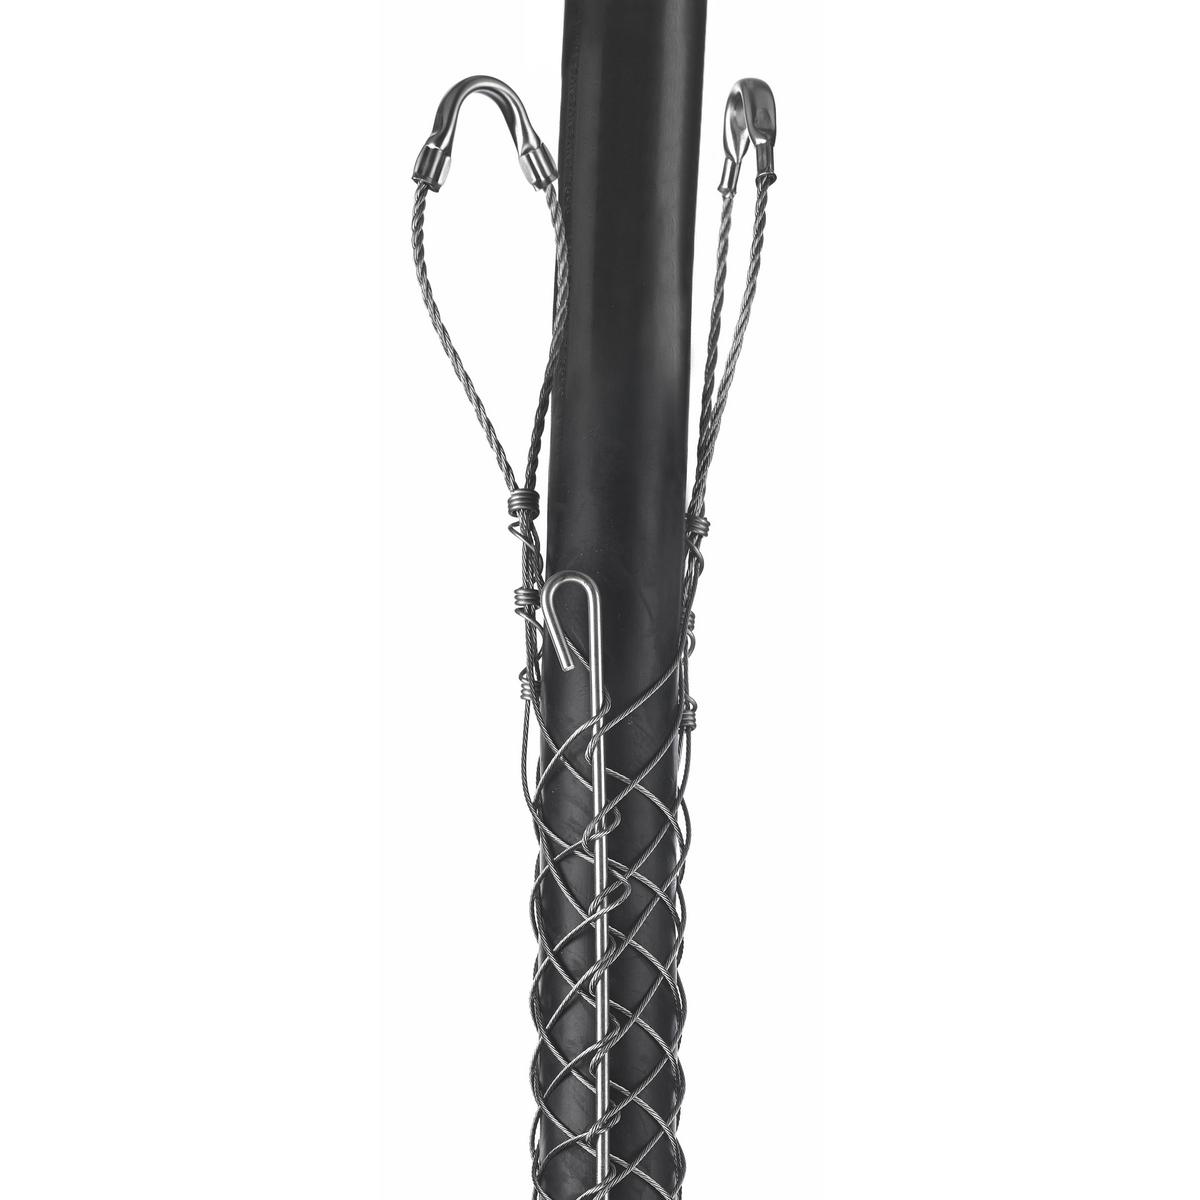 Hubbell 02403006 Support Grips, Double Eye, Single Weave, Split Mesh, Rod Closing, Stainless Steel, 1.25-1.49"  ; Double eye ; Strand equalizers position wires for equal loading throughout grip length ; Eye assemblies provide eye reinforcement at support hardware ; Split 